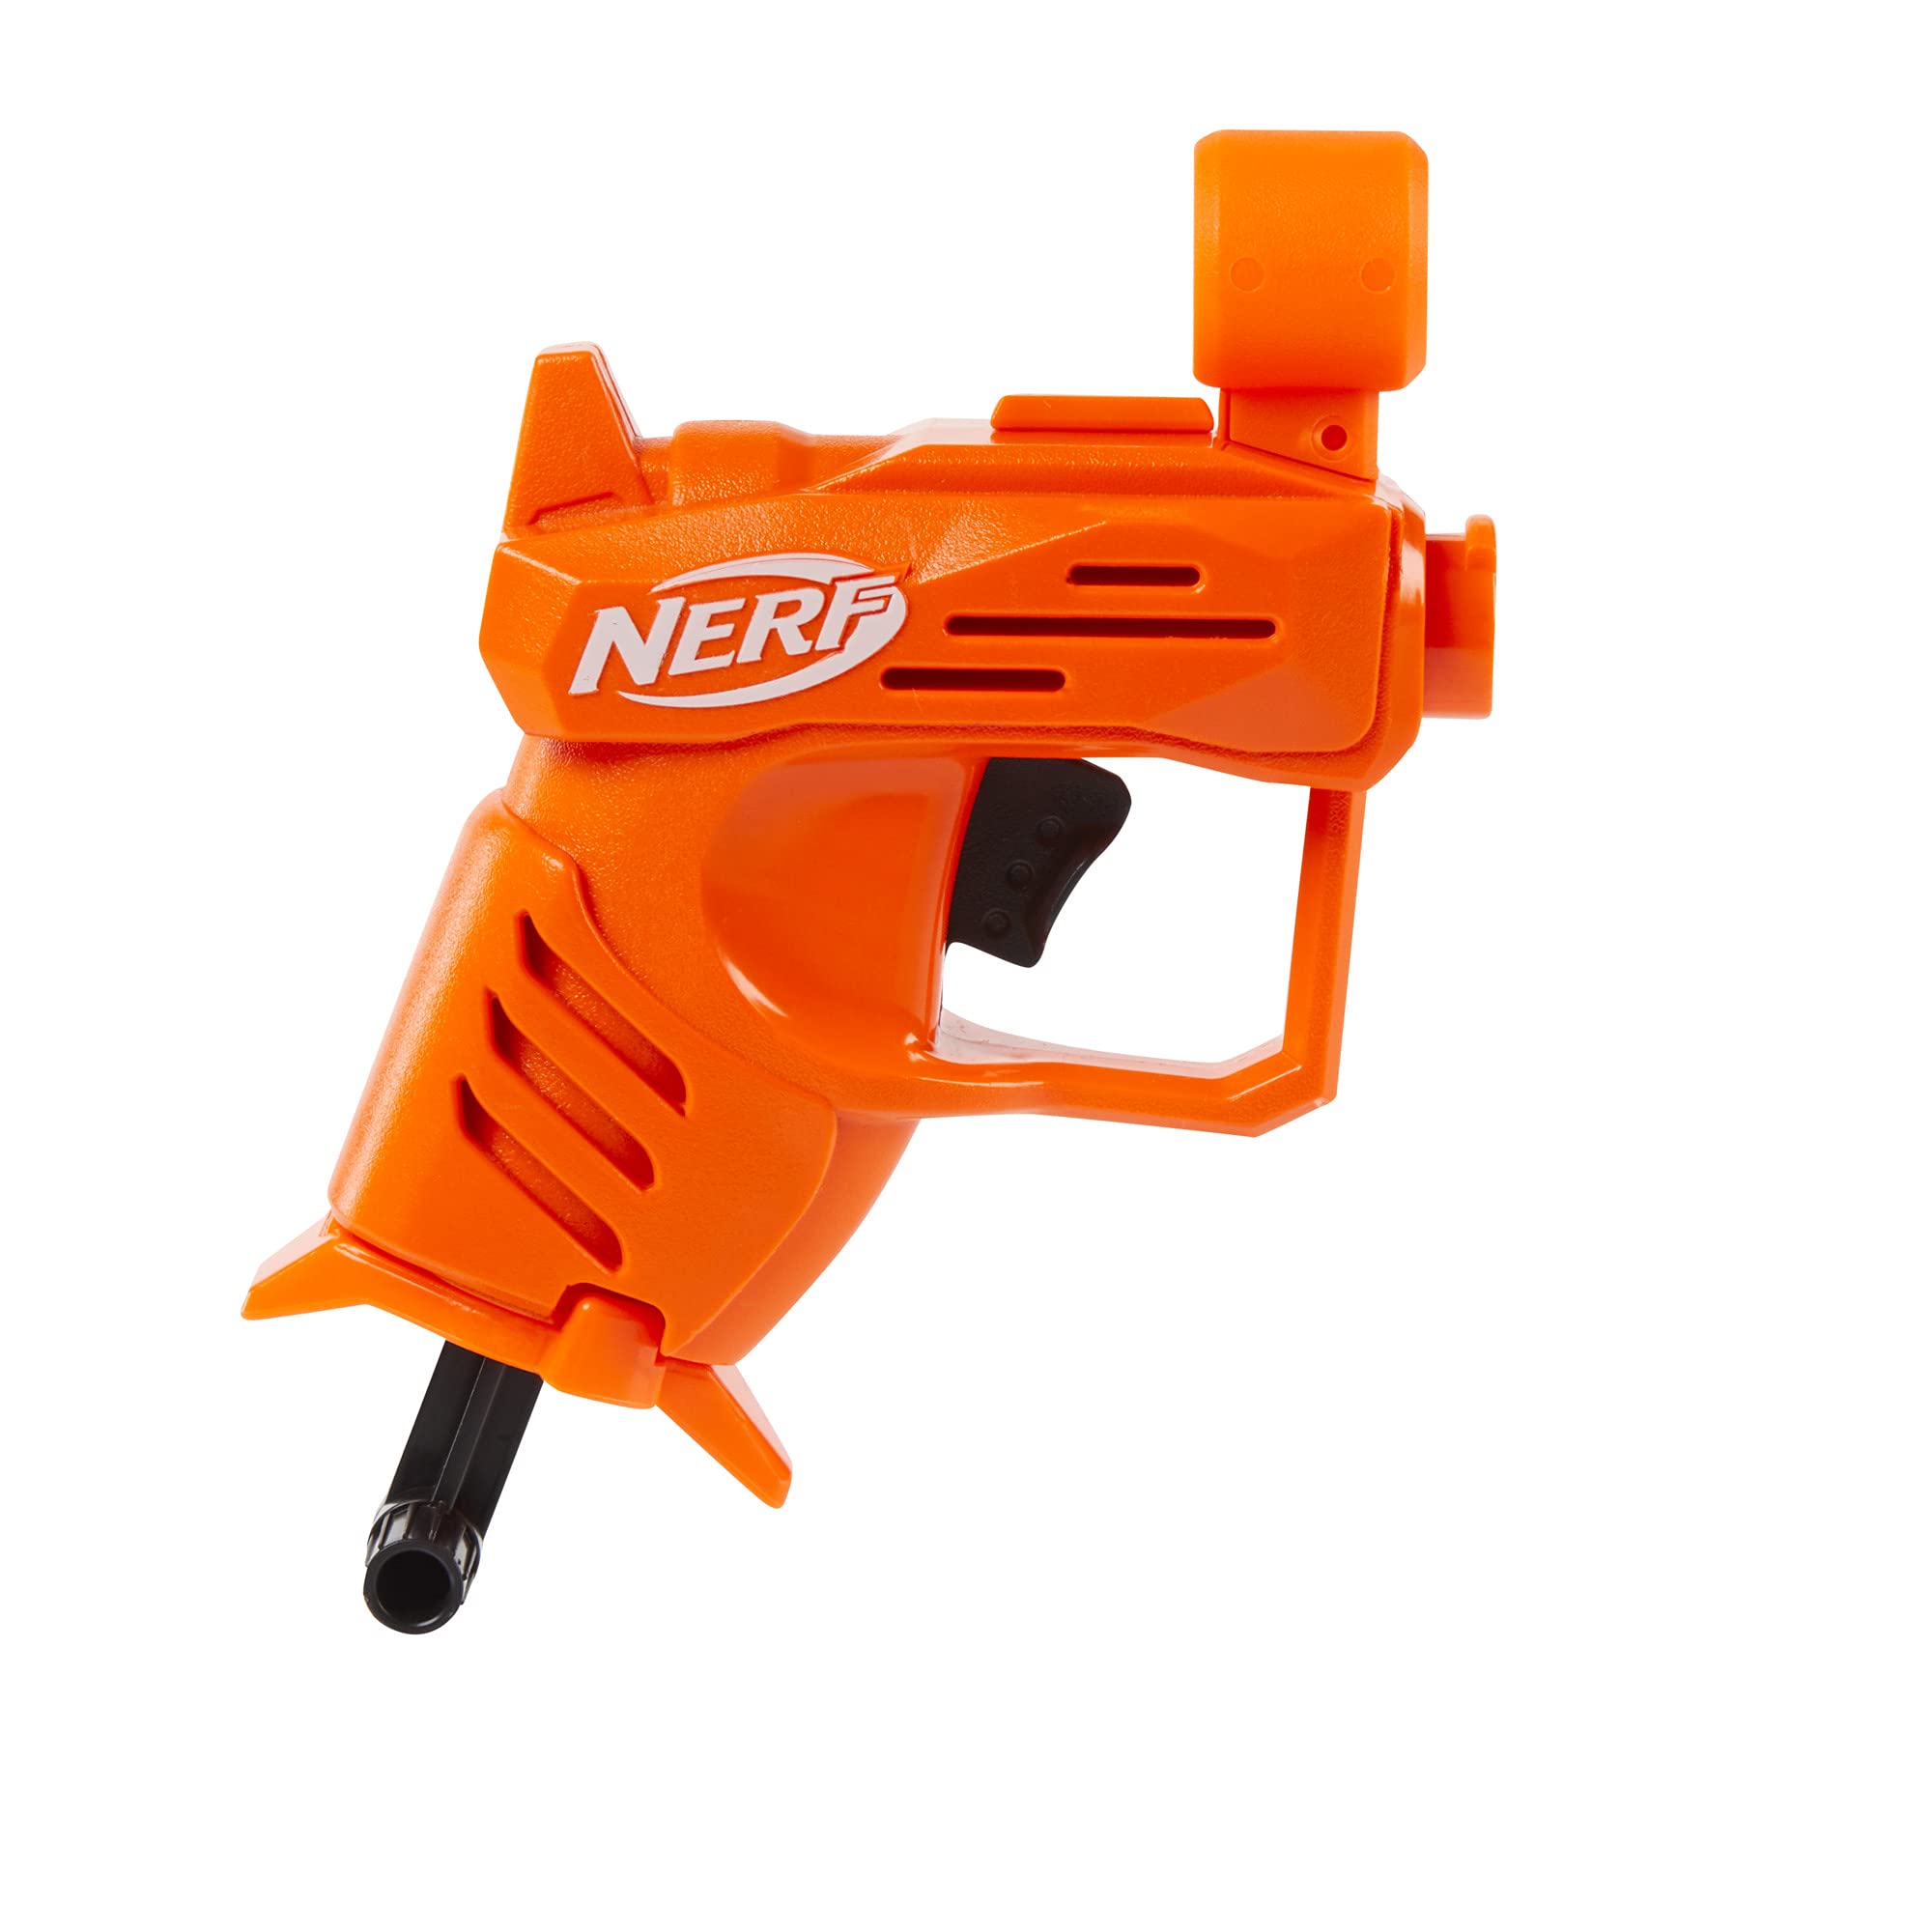 NERF Elite Ace SD-1 Party Pack, 10 Blasters, 20 Darts, 8 Year Old Boys & Girls & Up (Amazon Exclusive)